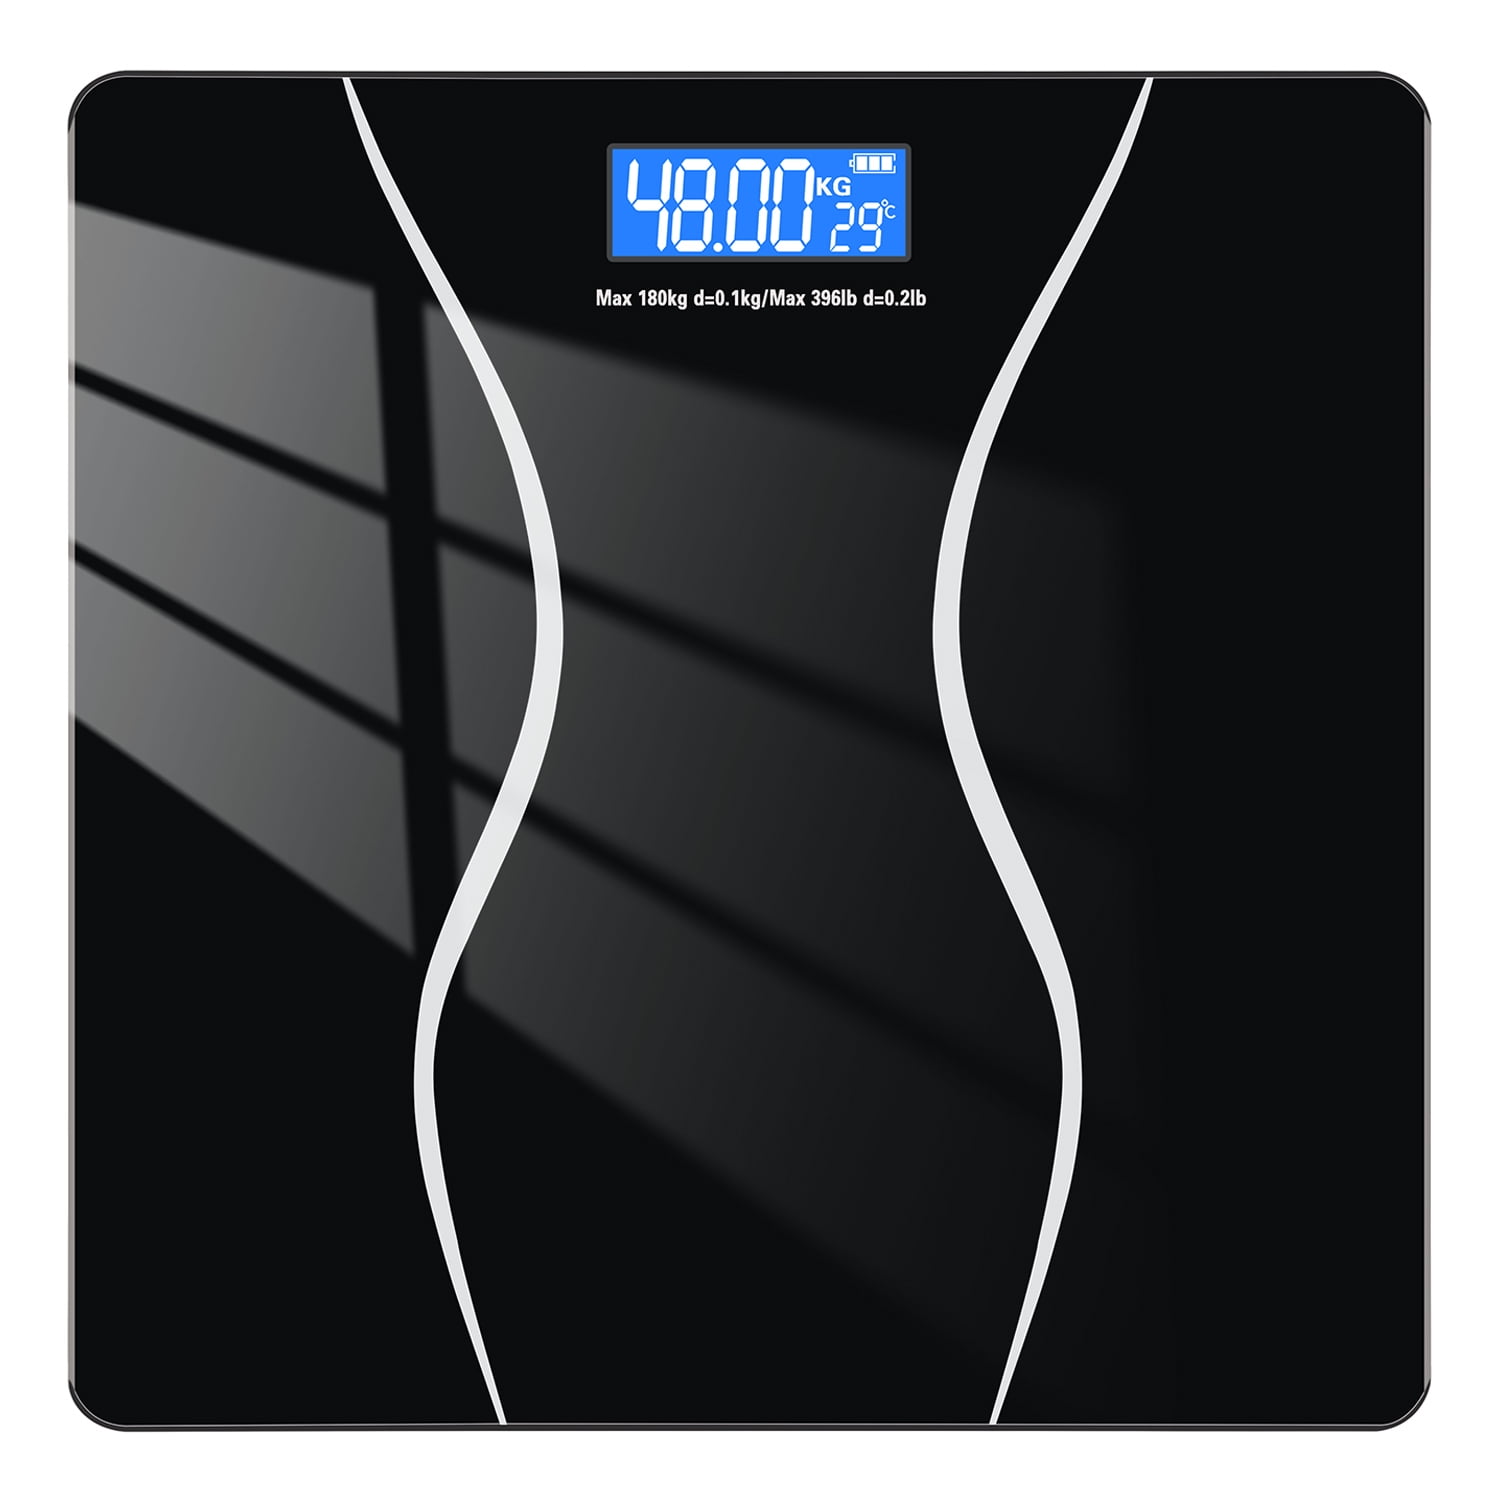  NUTRI FIT Extra-Wide/Ultra-Thick Digital Body Weight Bathroom  Scale with 3 Inch Large Easy Read Backlit LCD Display Max Capacity 400lb  Step-on Technology, Black : Health & Household